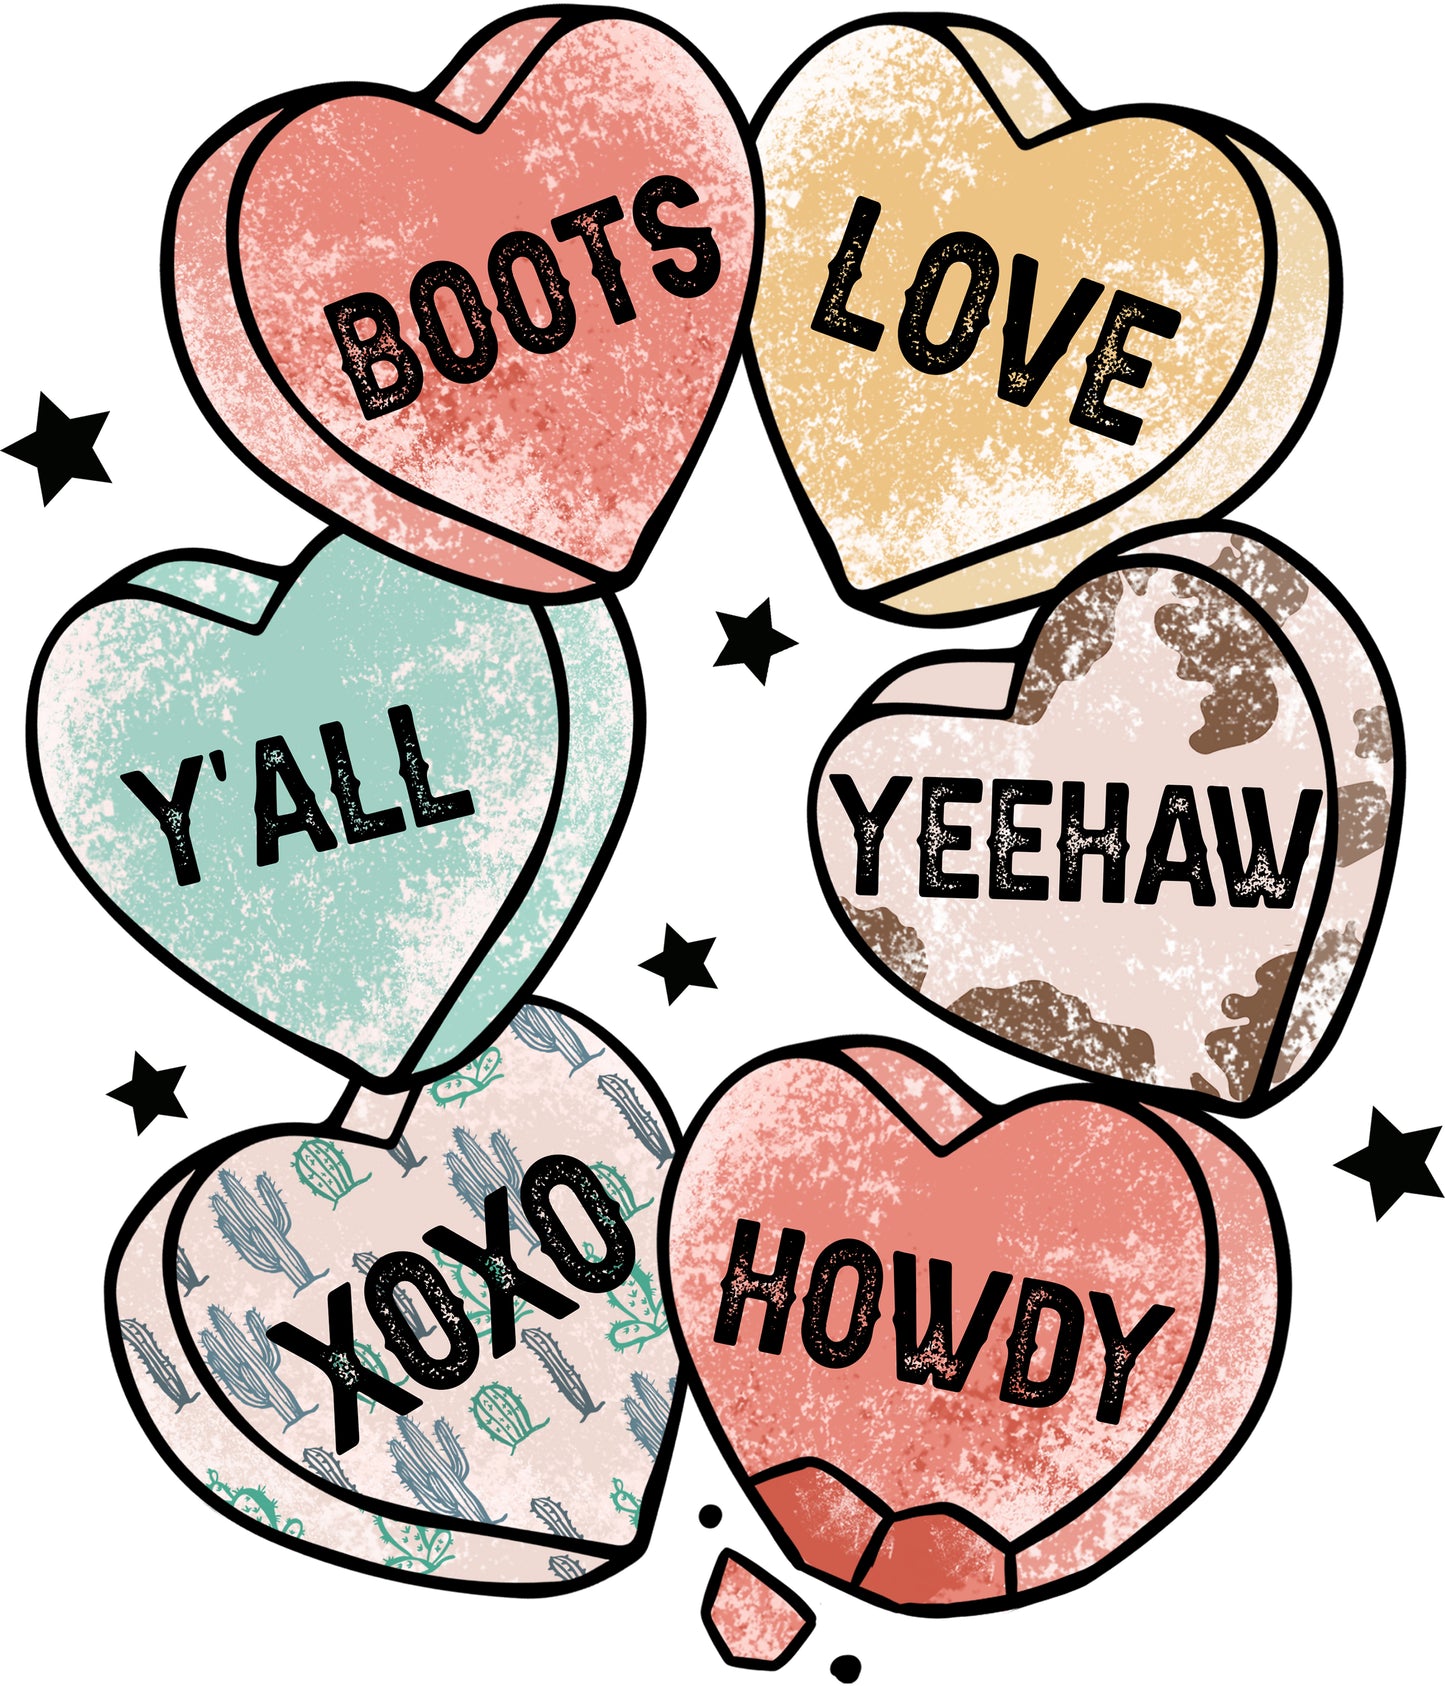 Western Candy Hearts